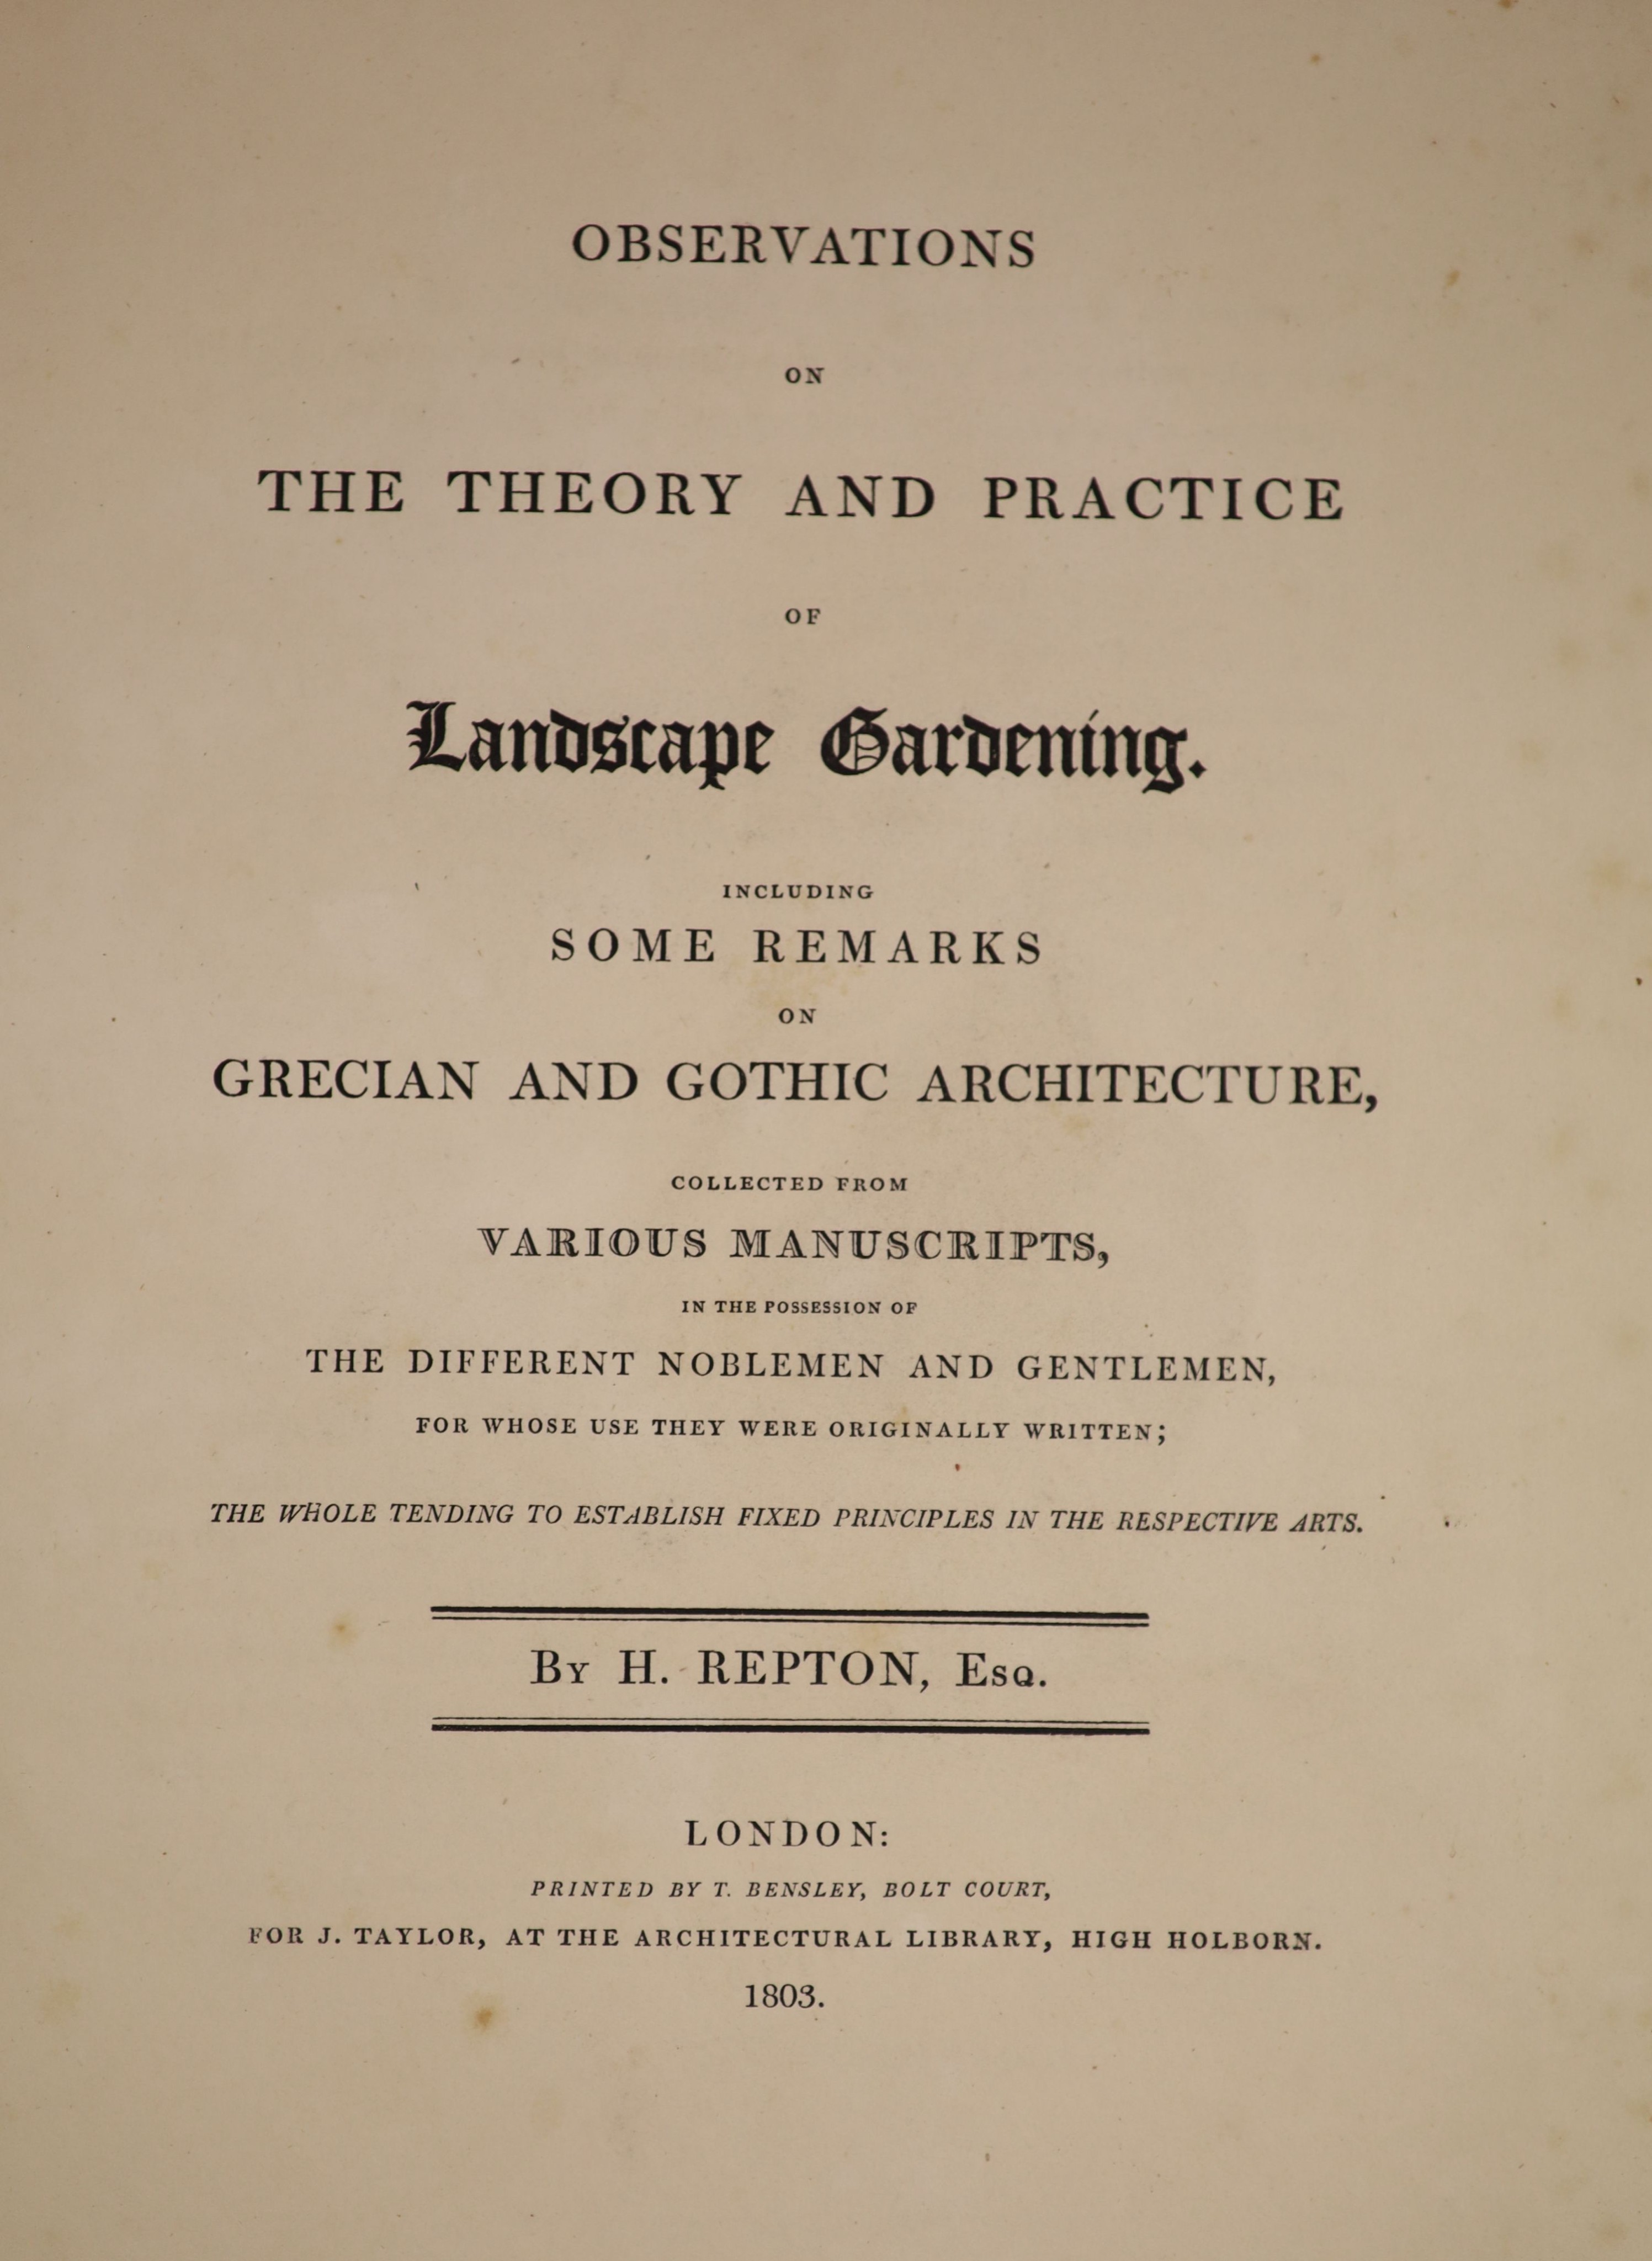 Repton, Humphry- Observations on the Theory and Practice of Gardening, including some Remarks on Grecian and Gothic Architecture, qto, rebound in three-quarter green levant morocco, with portrait and 26 plates (12 of the